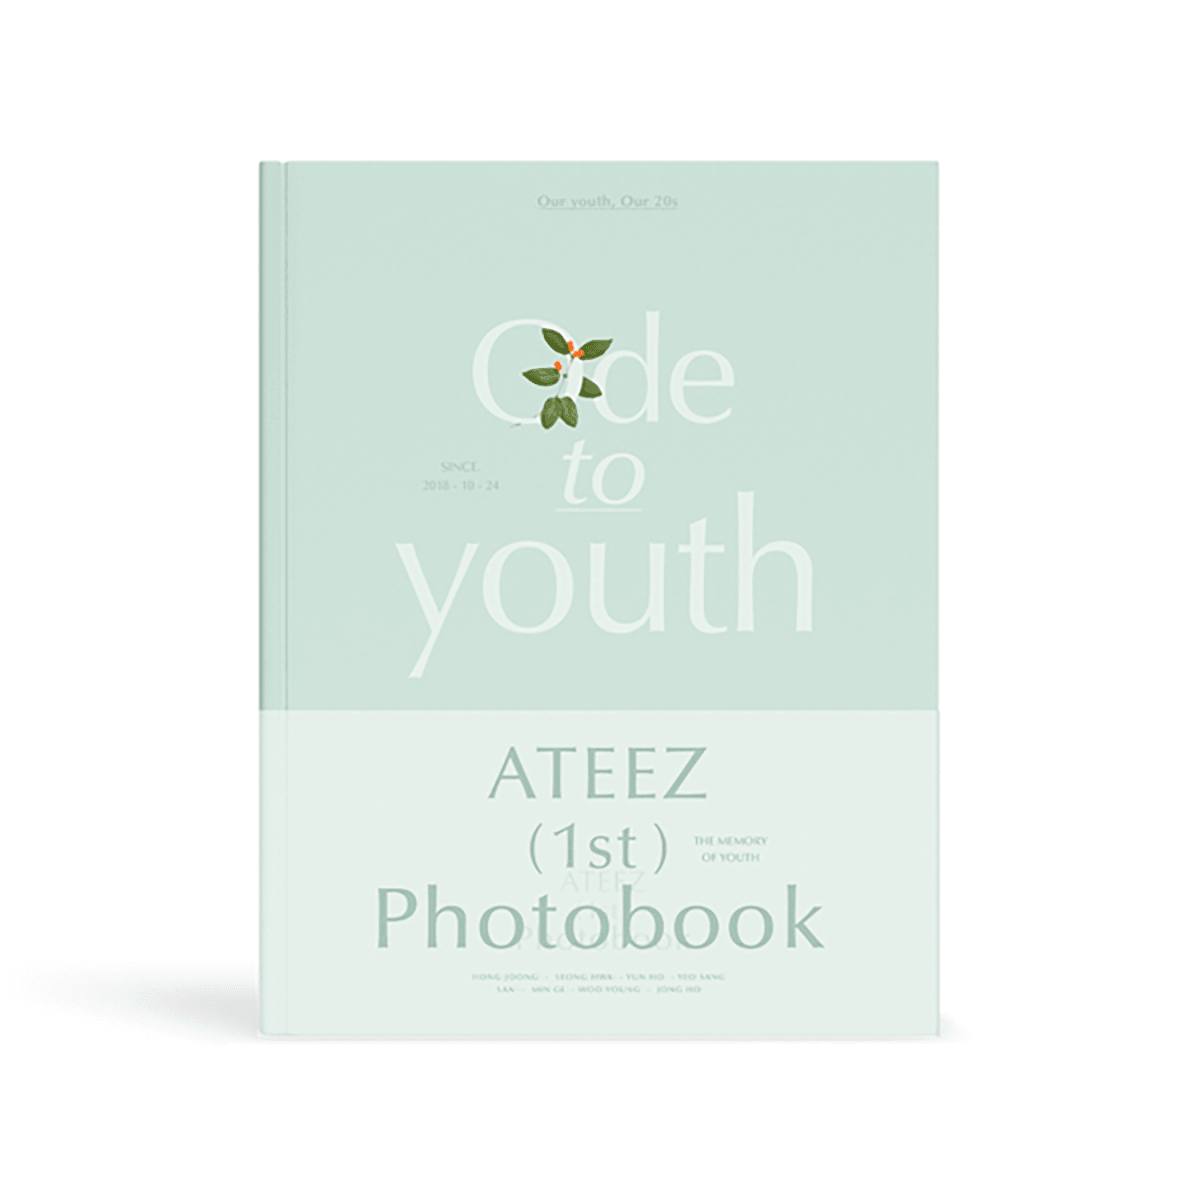 ATEEZ 1ST PHOTO BOOK 'ODE TO YOUTH' cover